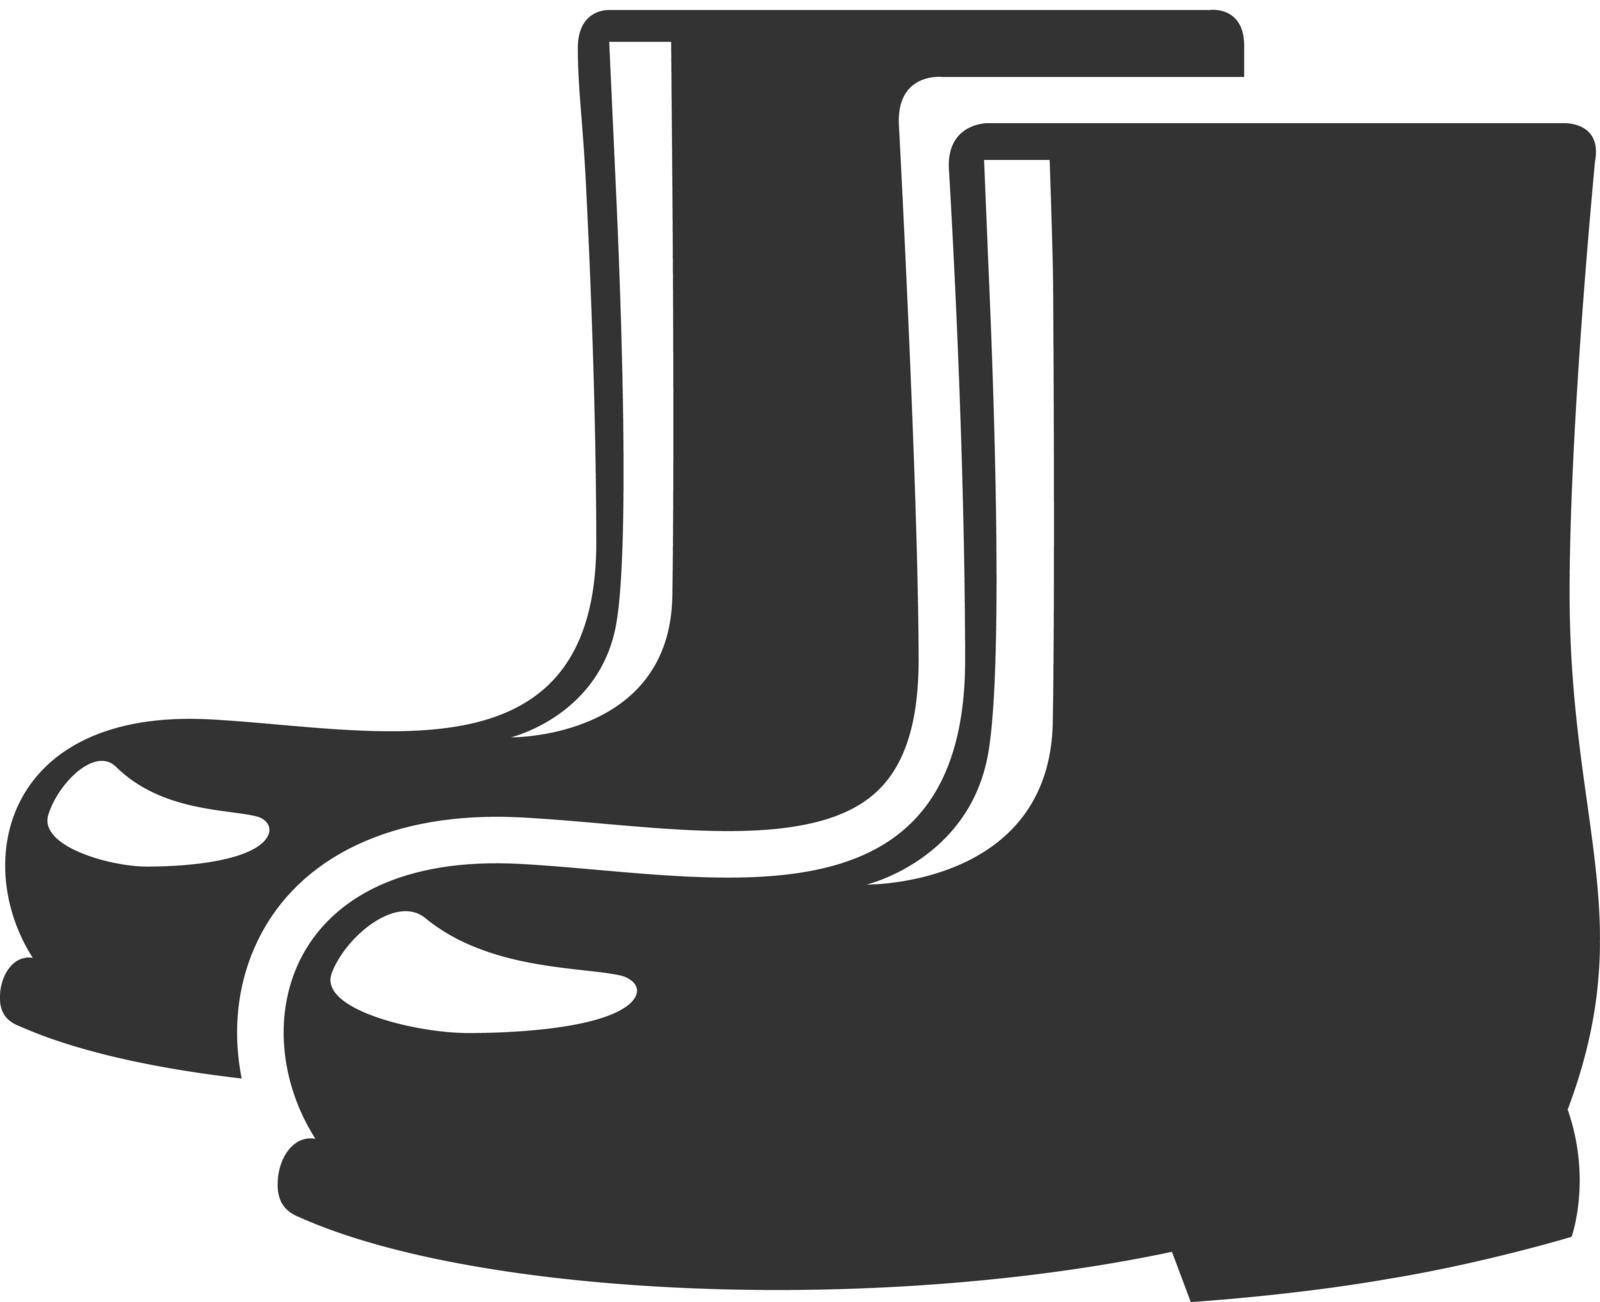 Wet boots icon in single color. Rain season weather protection